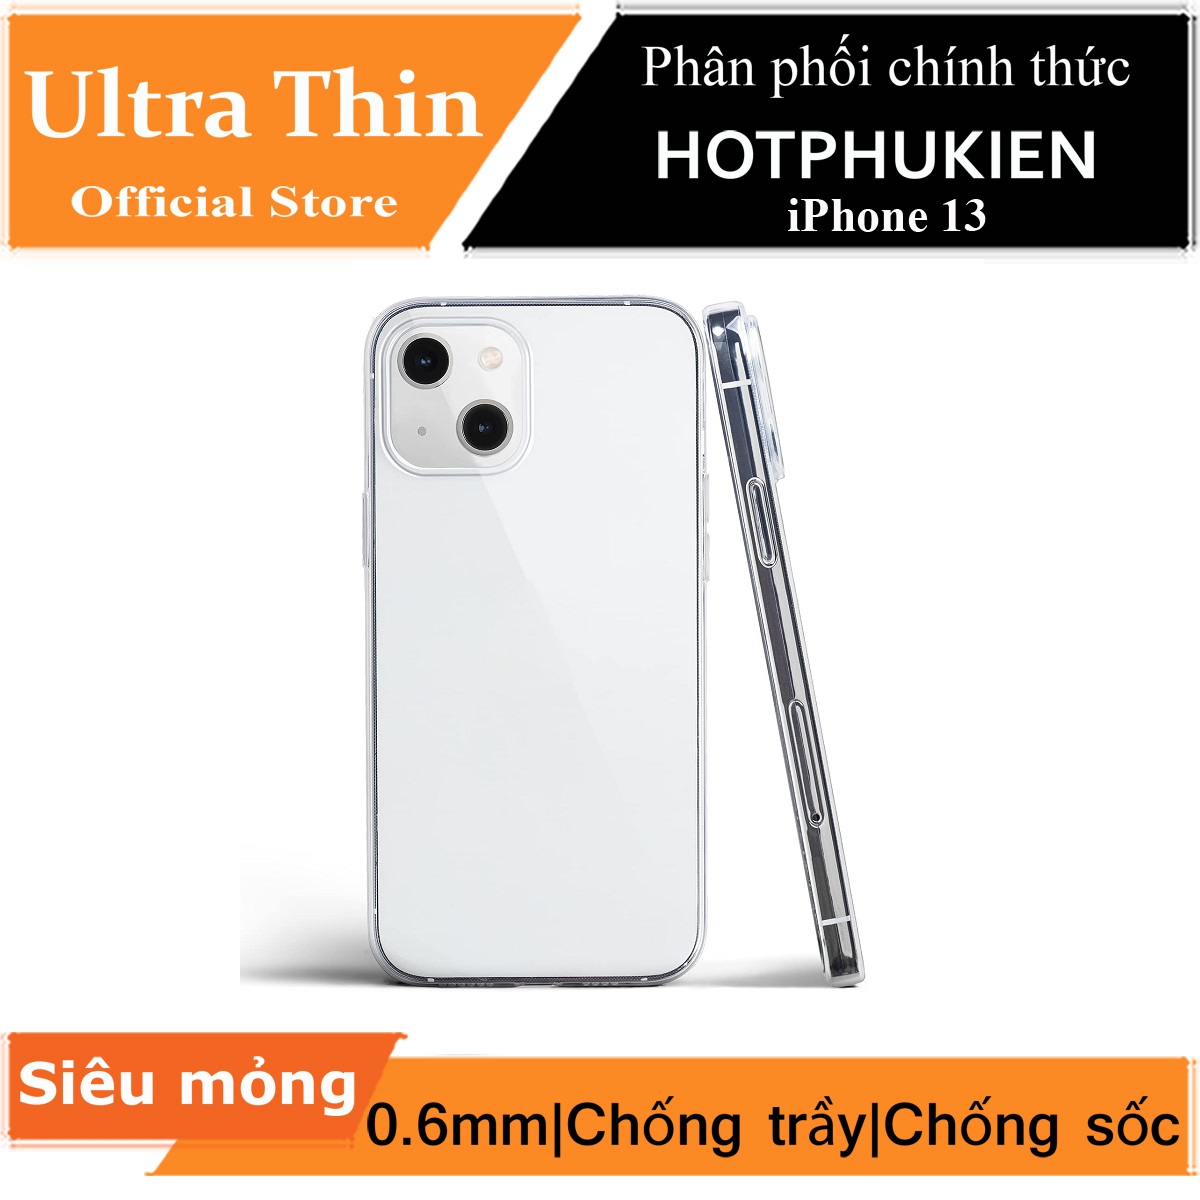 Ốp lưng dẻo silicon trong suốt cho iPhone 13 hiệu Ultra Thin